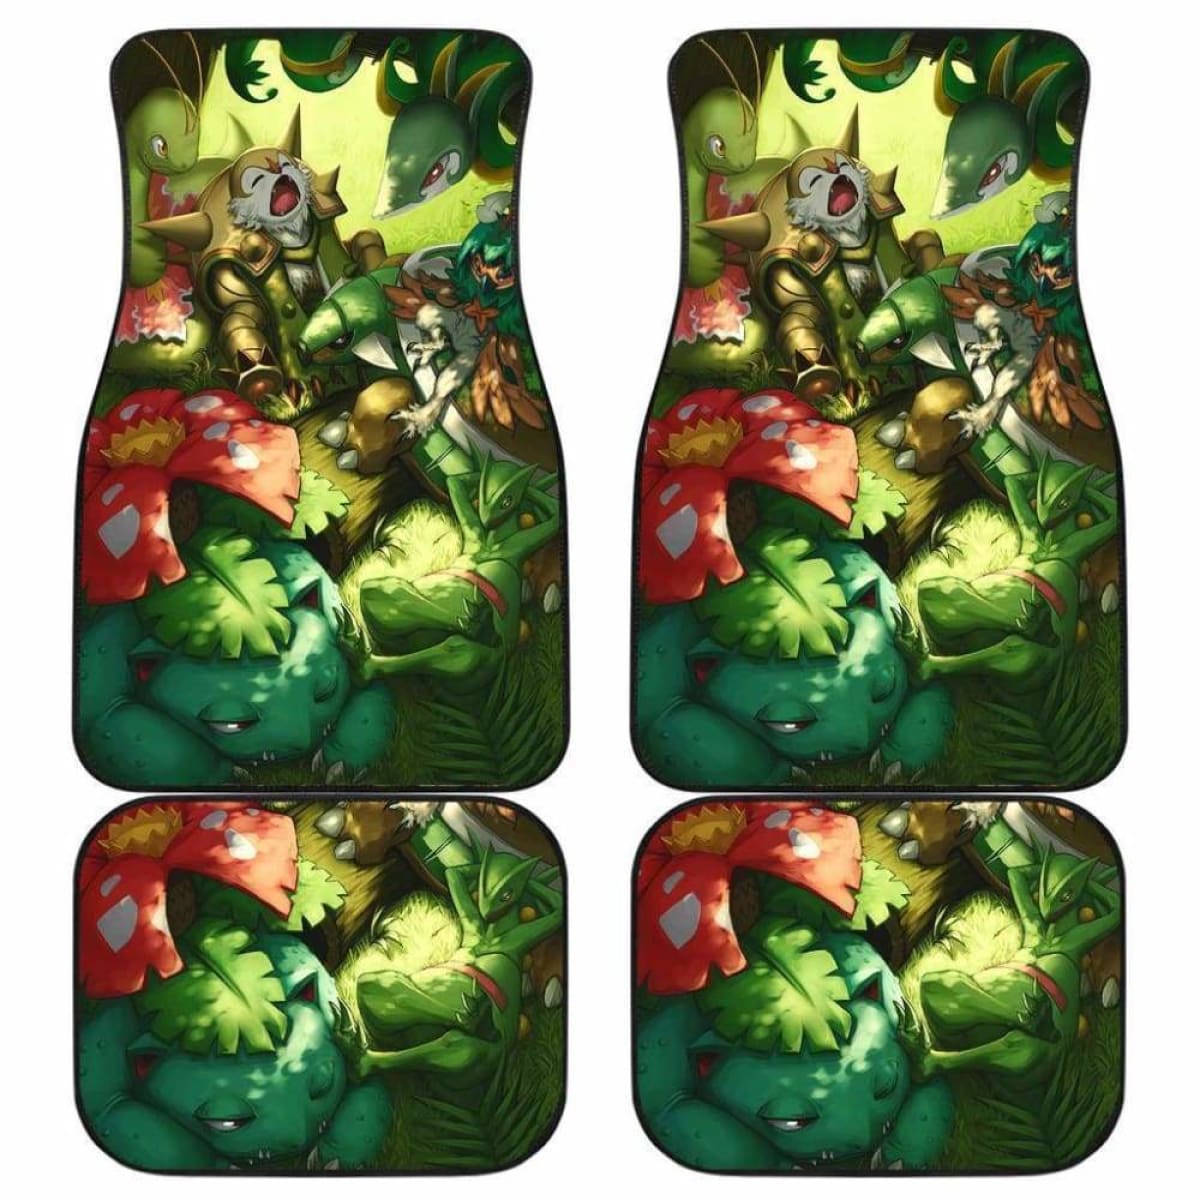 Floral <a href='/car-mat/'>Car Mat</a>s Calm the Beast in You While You Drive.